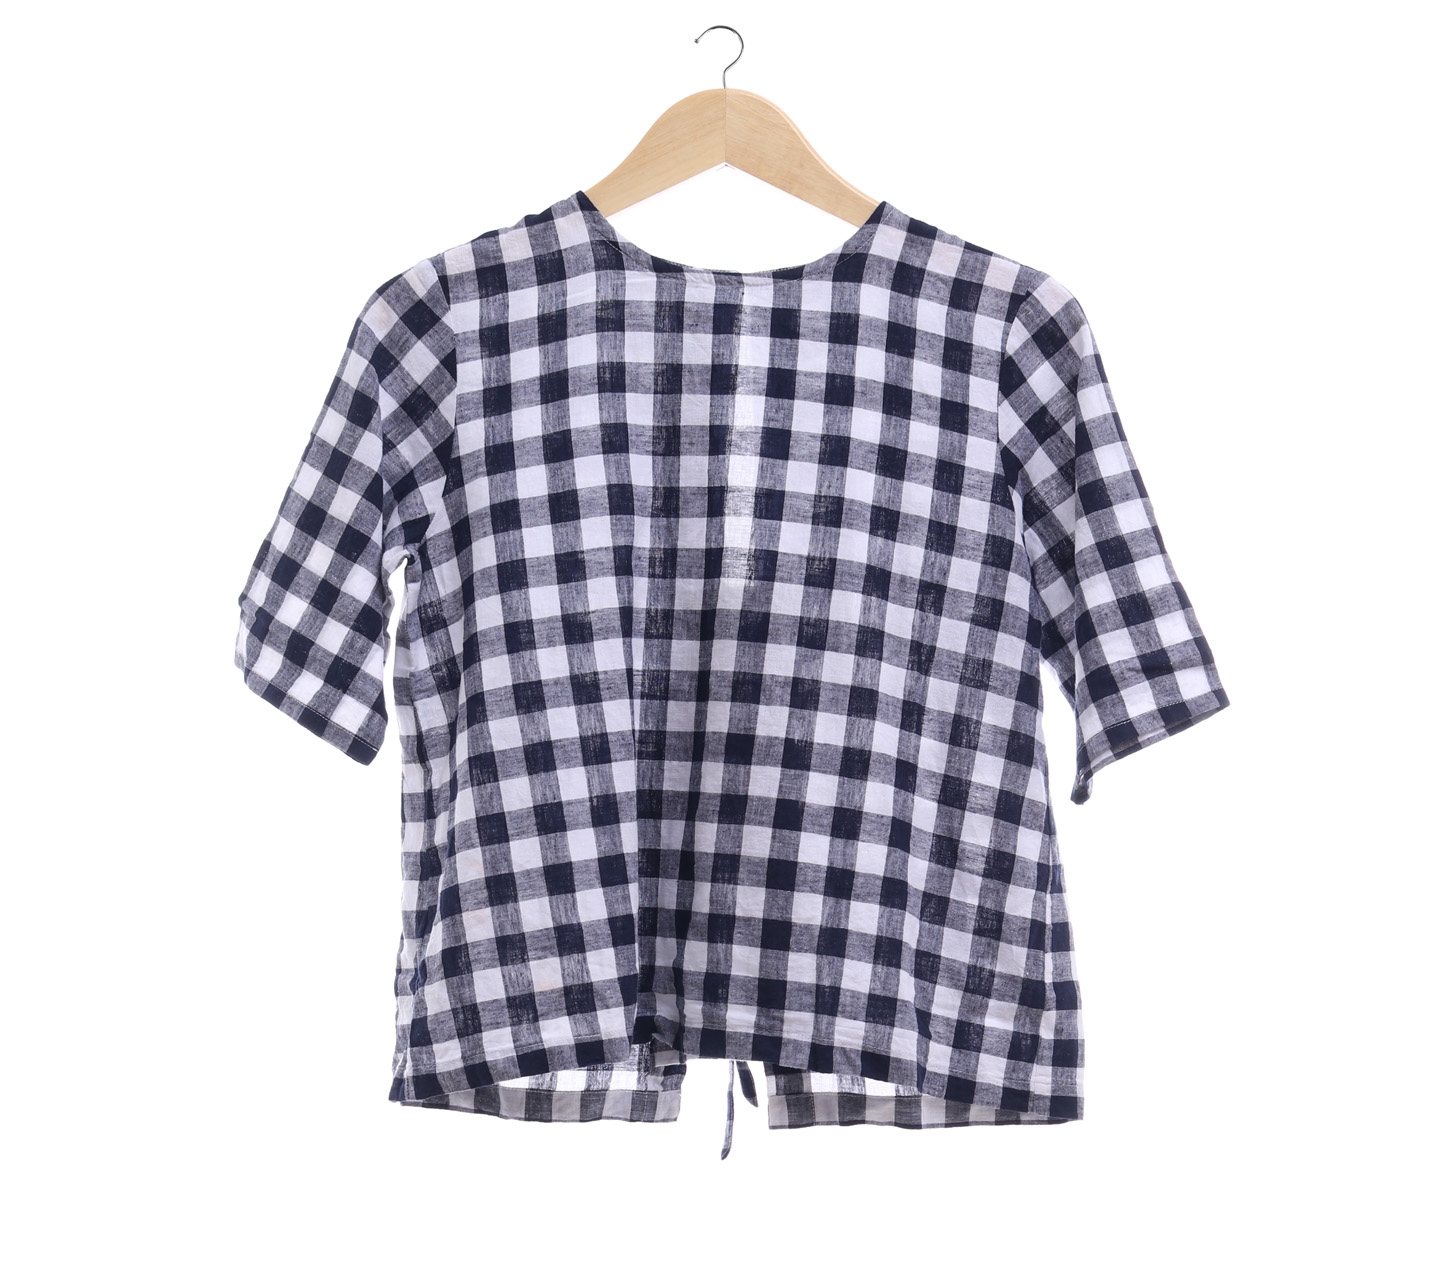 Cotton Ink Dark Blue And White Plaid Blouse